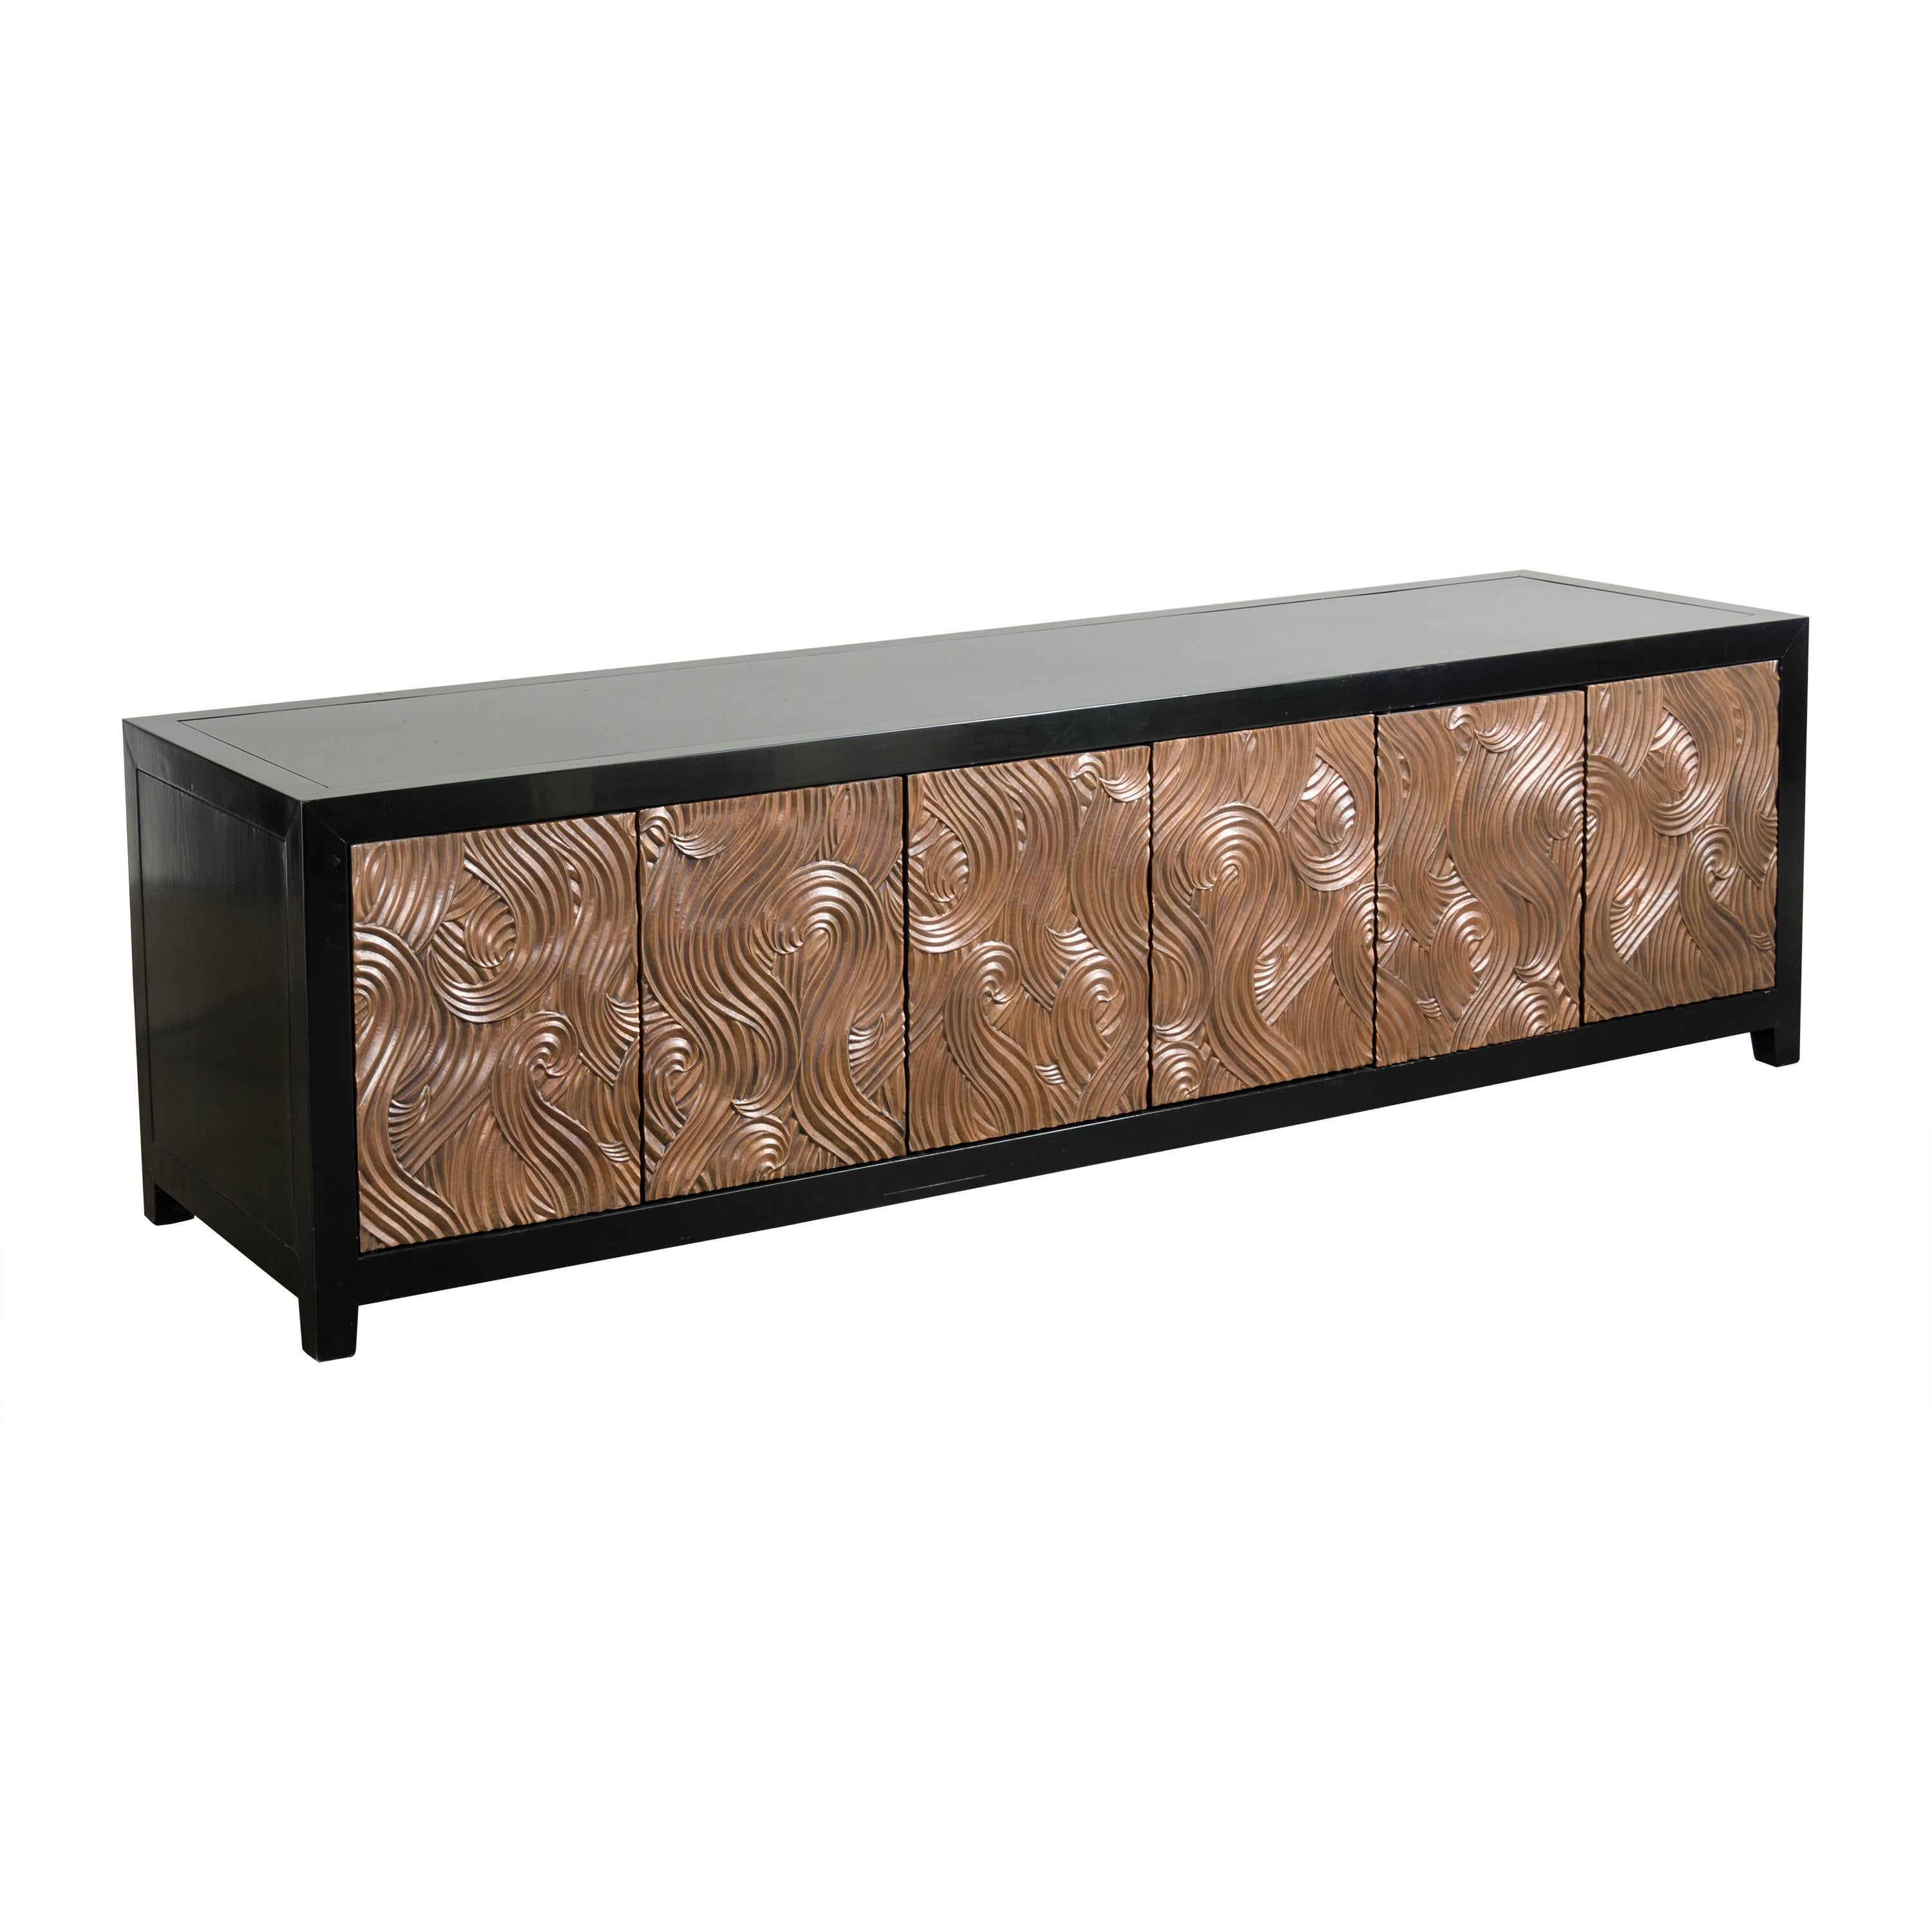 Dragon Swirl 6 Doors Media Cabinet by Robert Kuo, Hand Repousse, Limited Edition